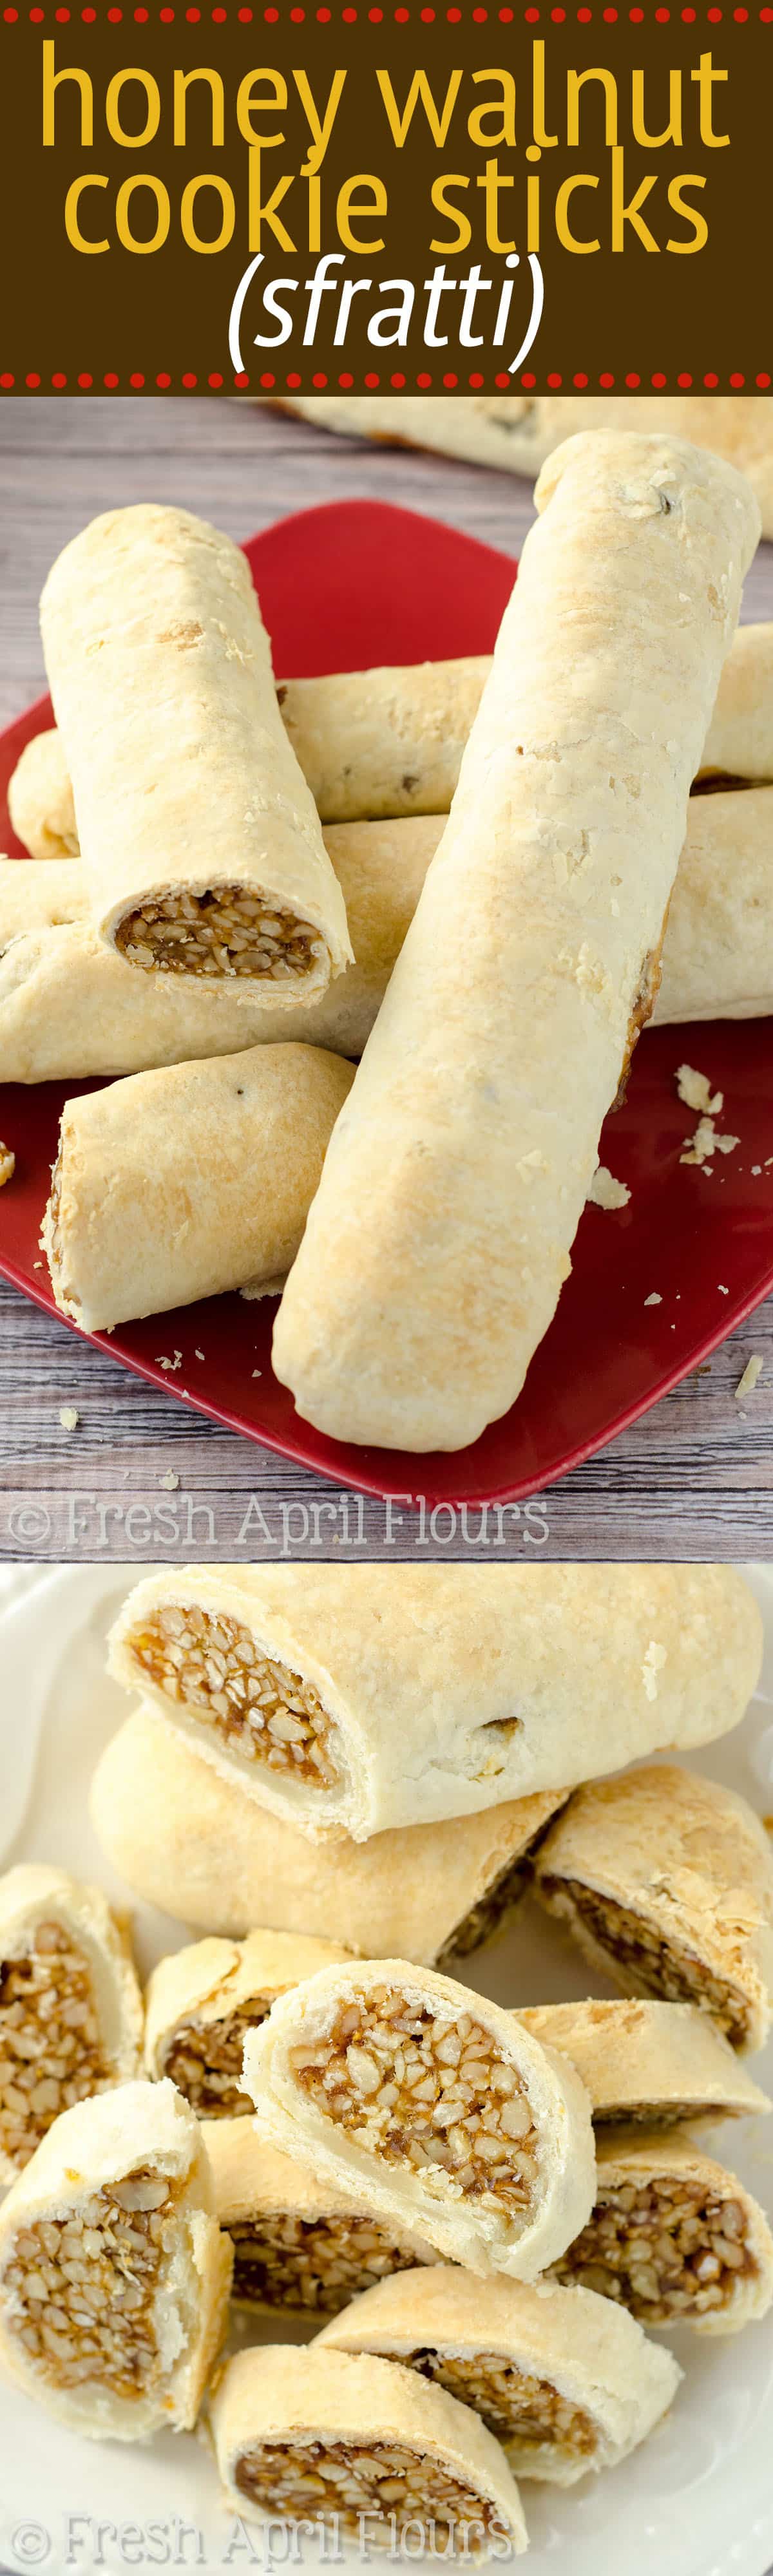 Traditional Italian cookies made from a spiced honey walnut filling and wrapped in homemade pie crust. via @frshaprilflours